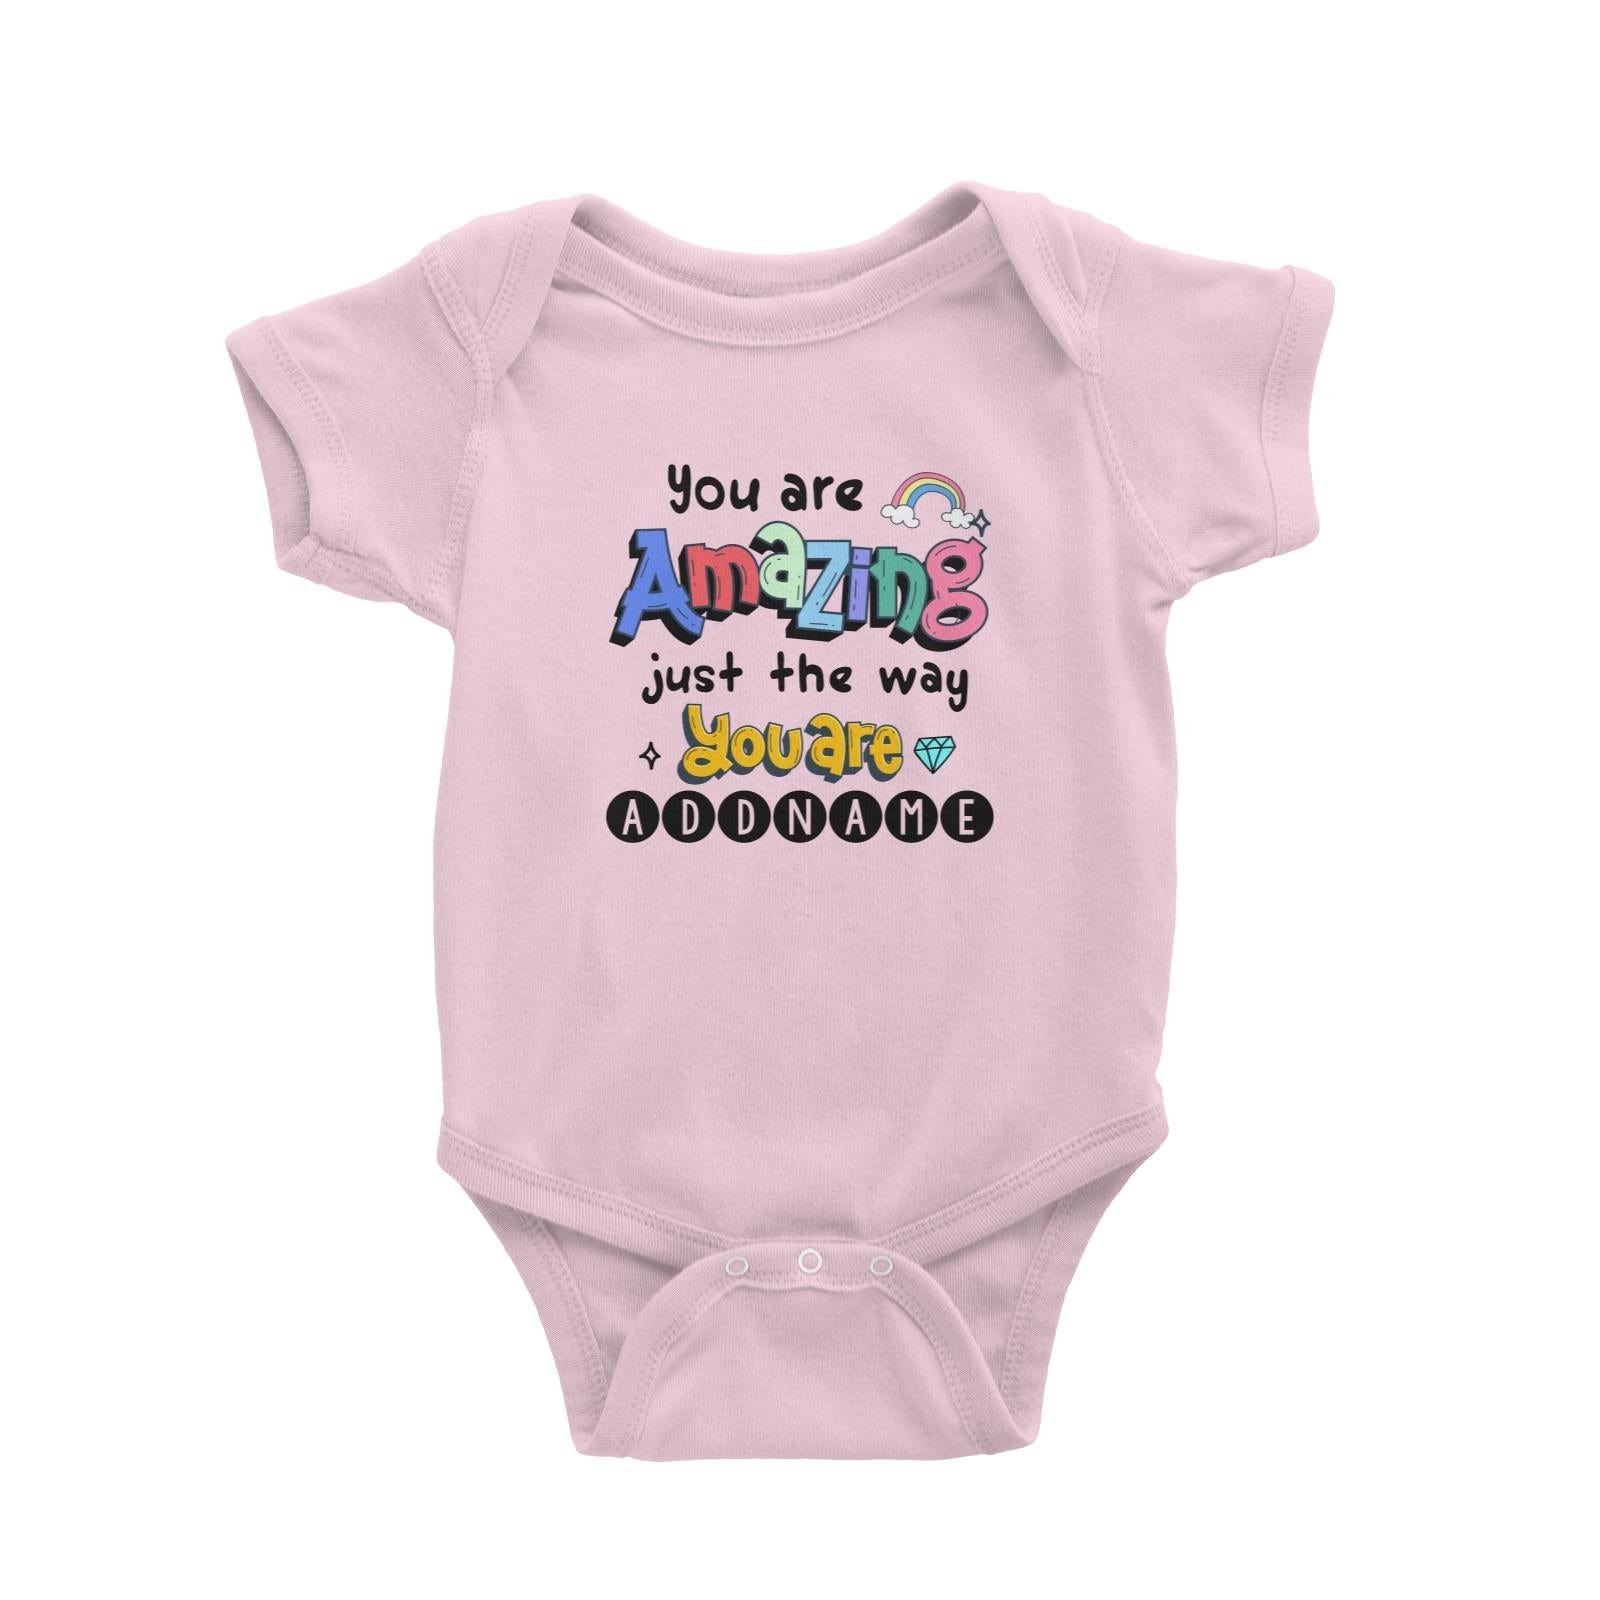 Children's Day Gift Series You Are Amazing Just The Way You Are Addname Baby Romper